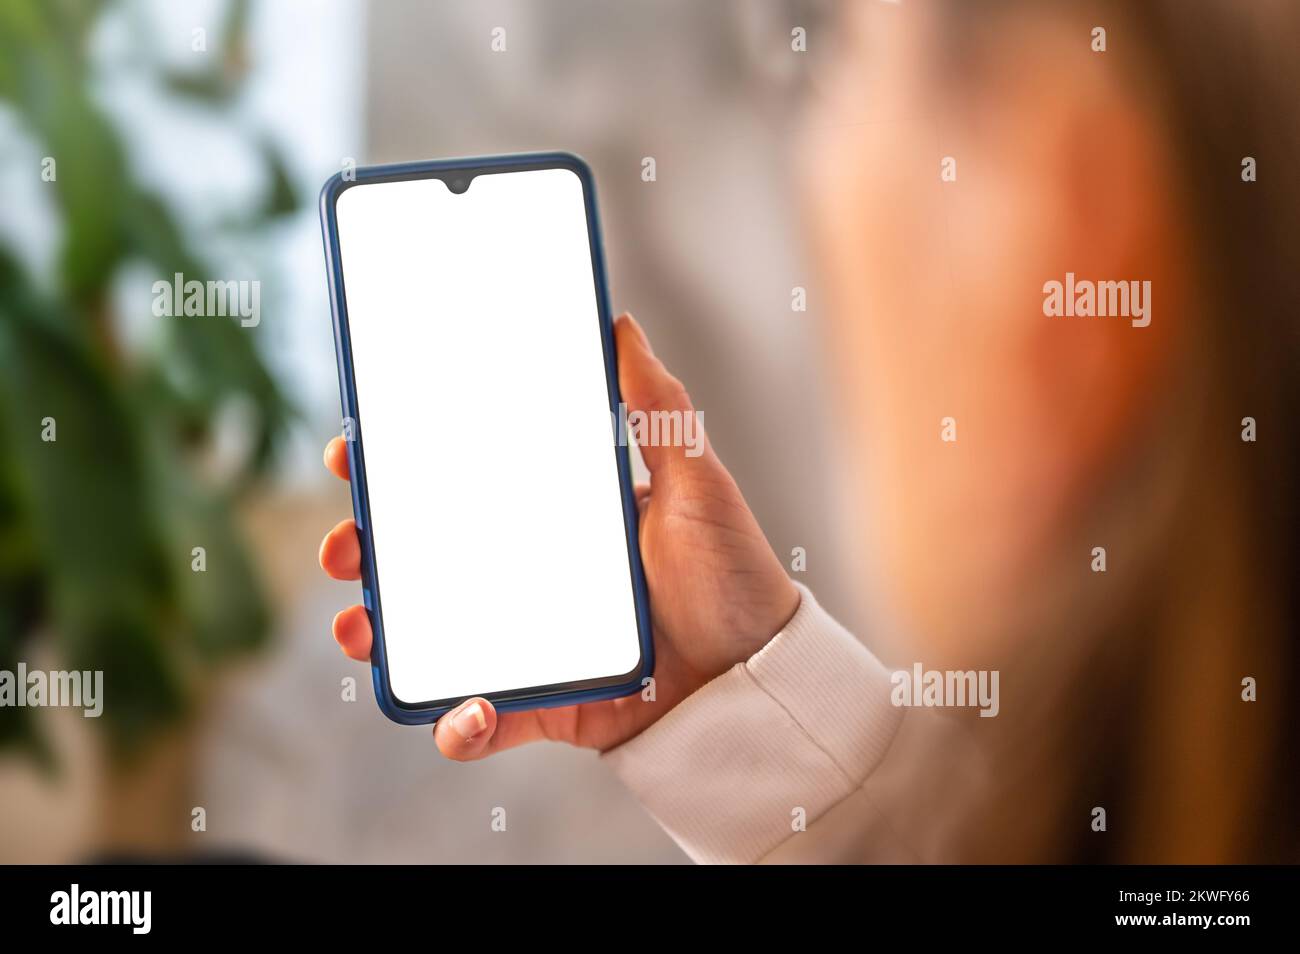 Smartphone with blank display in woman's hand as template for customization Stock Photo